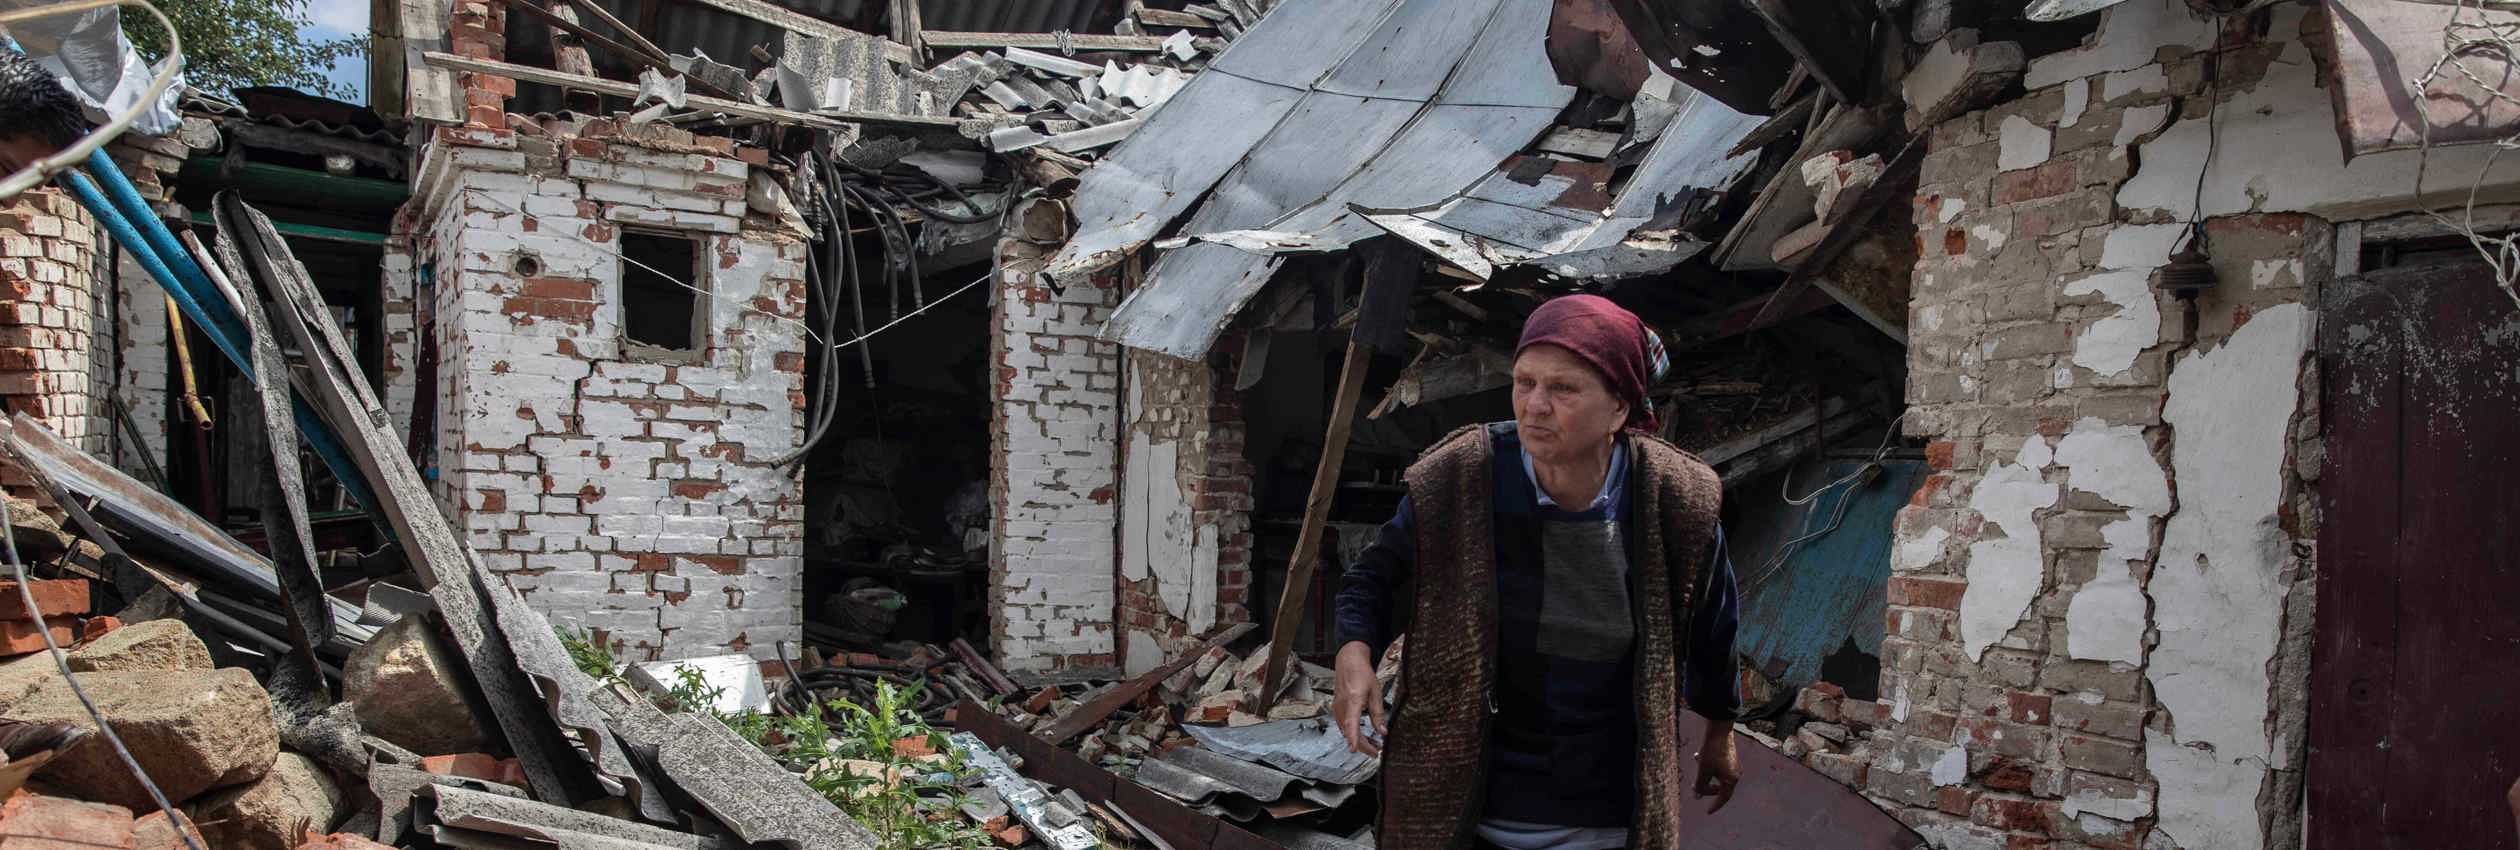 UNHCR High Commissioner for Refugees, Filippo Grandi, meets Liudmyla, 65, at her destroyed home in Makariv. ; More than 6.2 million people remain internally displaced by the war in Ukraine. Up to 20,000 civilians were evacuated in Kyiv Oblast, including from Irpin and Bucha districts.